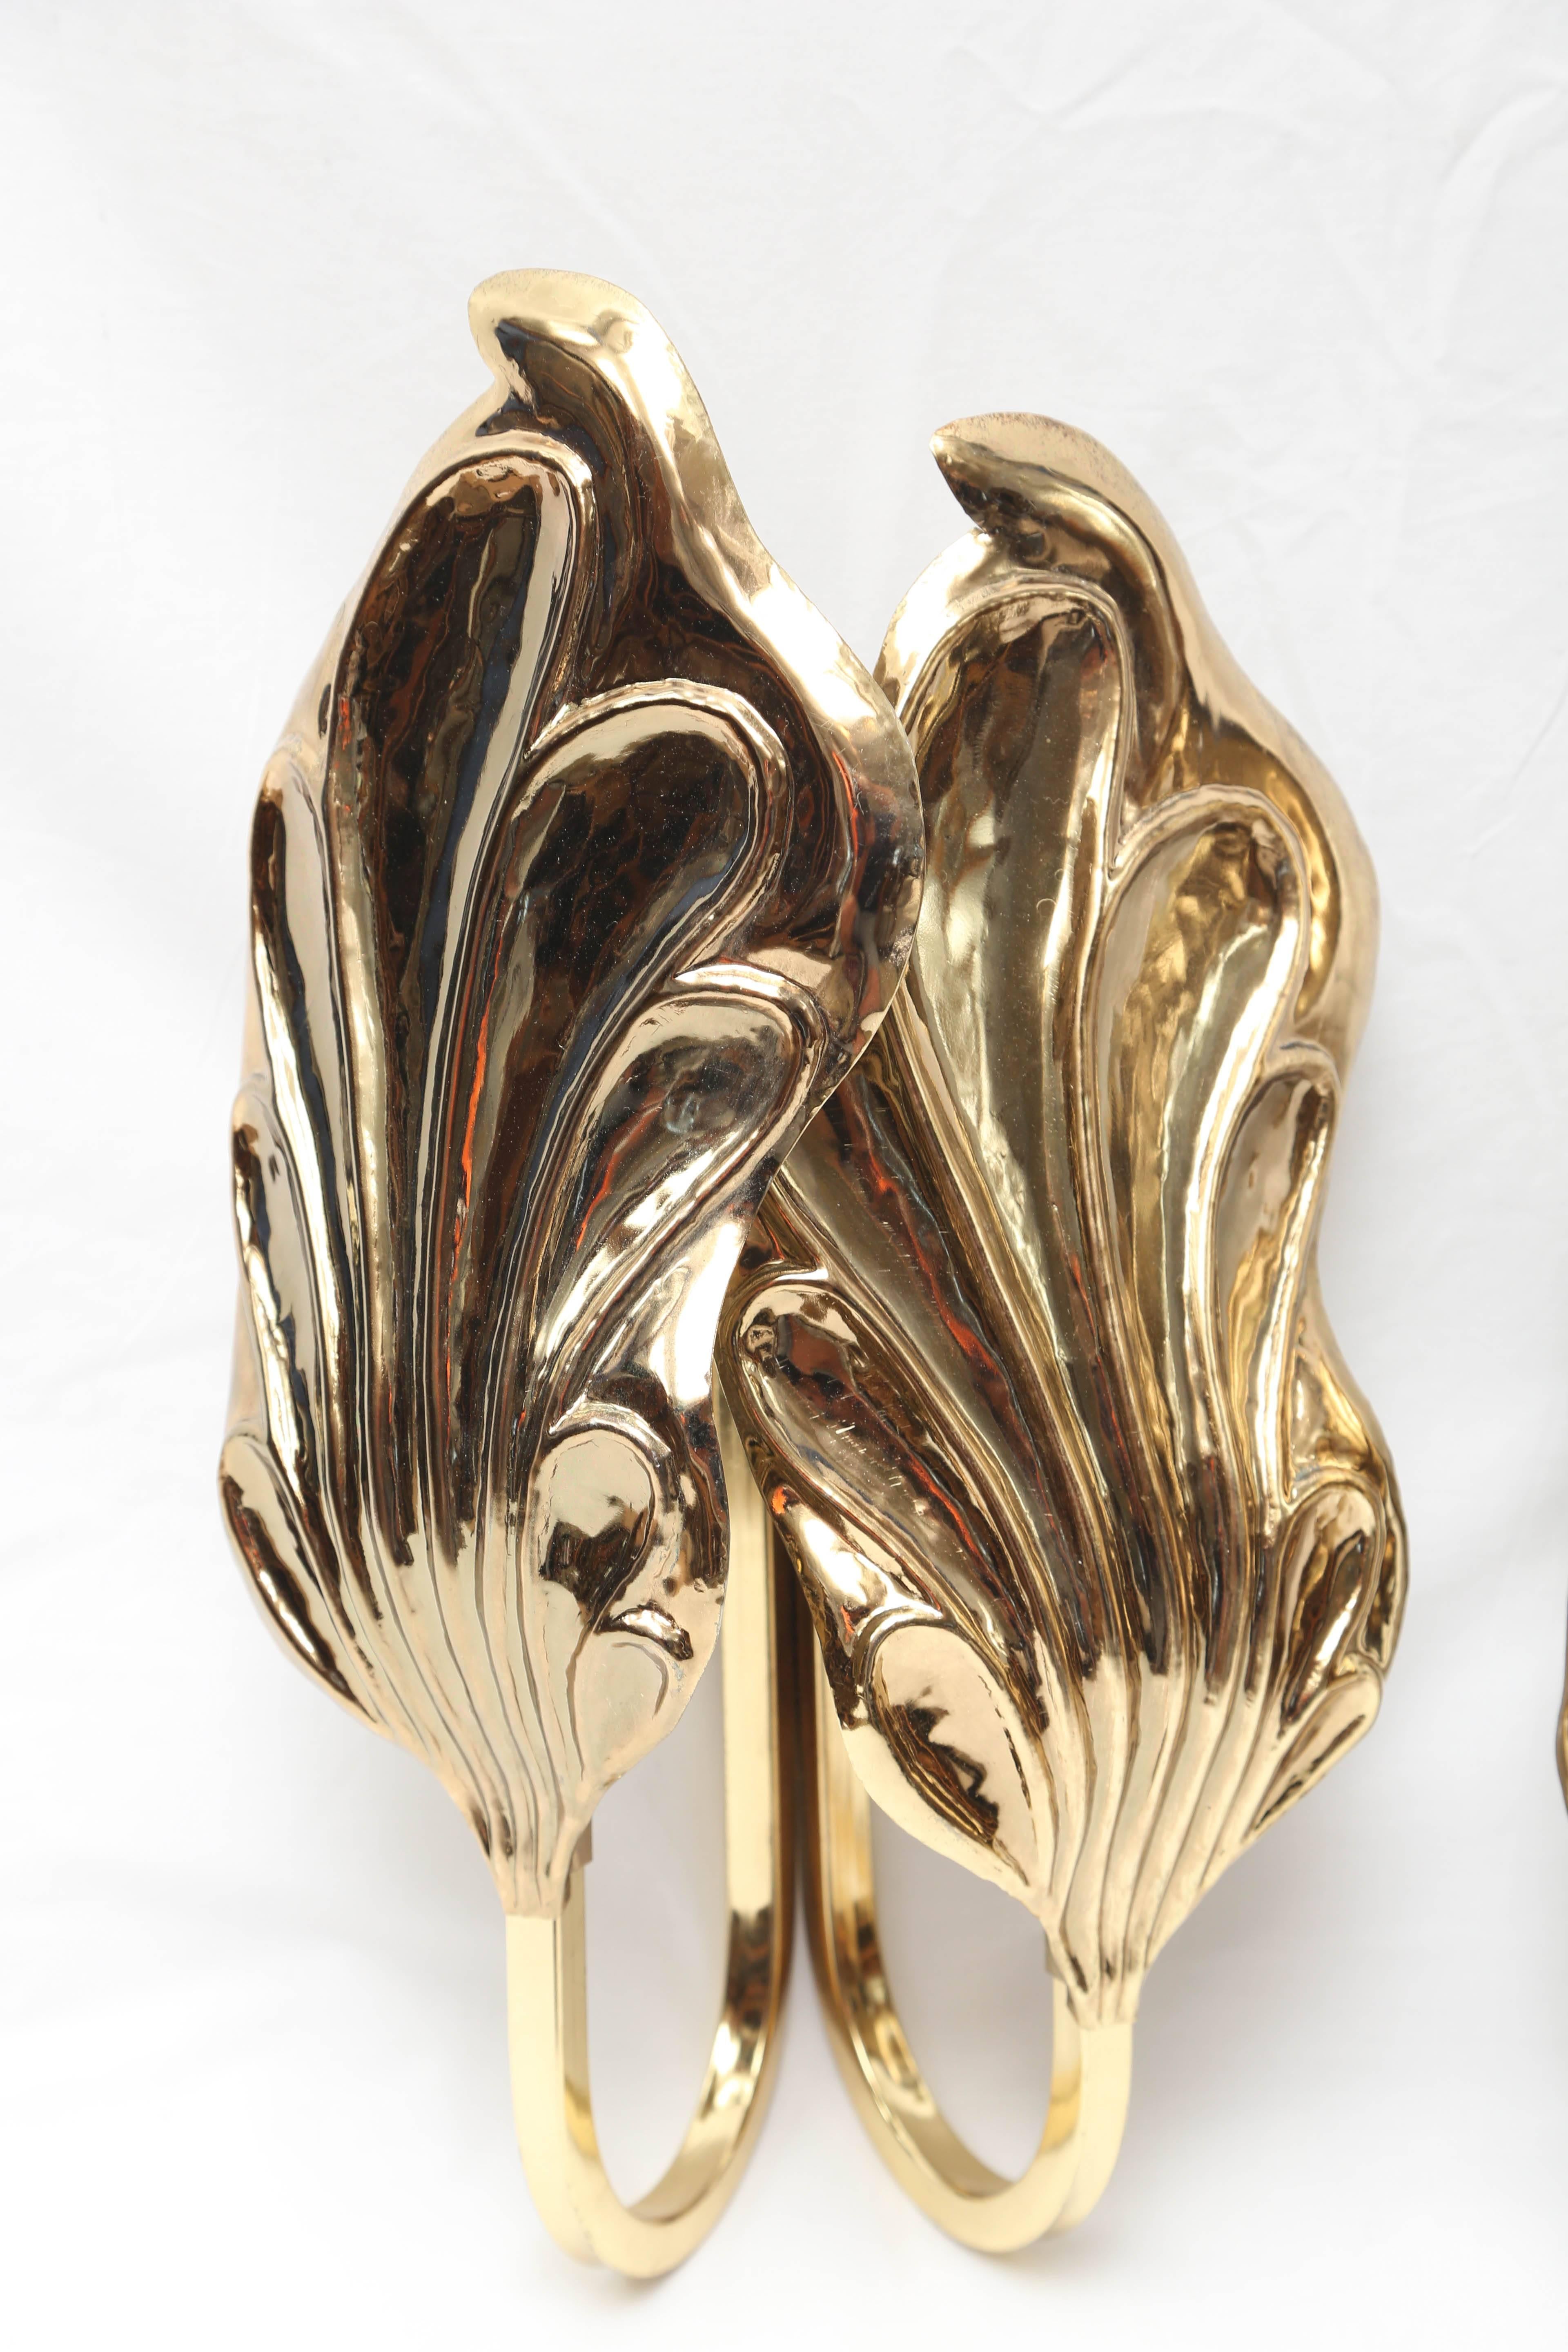 Gorgeous pair of vintage Tommaso Barbi brass Italian leaf sconces, circa 1970s. These Classic sconces are in excellent condition, matched left and right, and have two candelabra lights in each sconce. Each sconce measures 17” H x 9” W x 6” D.